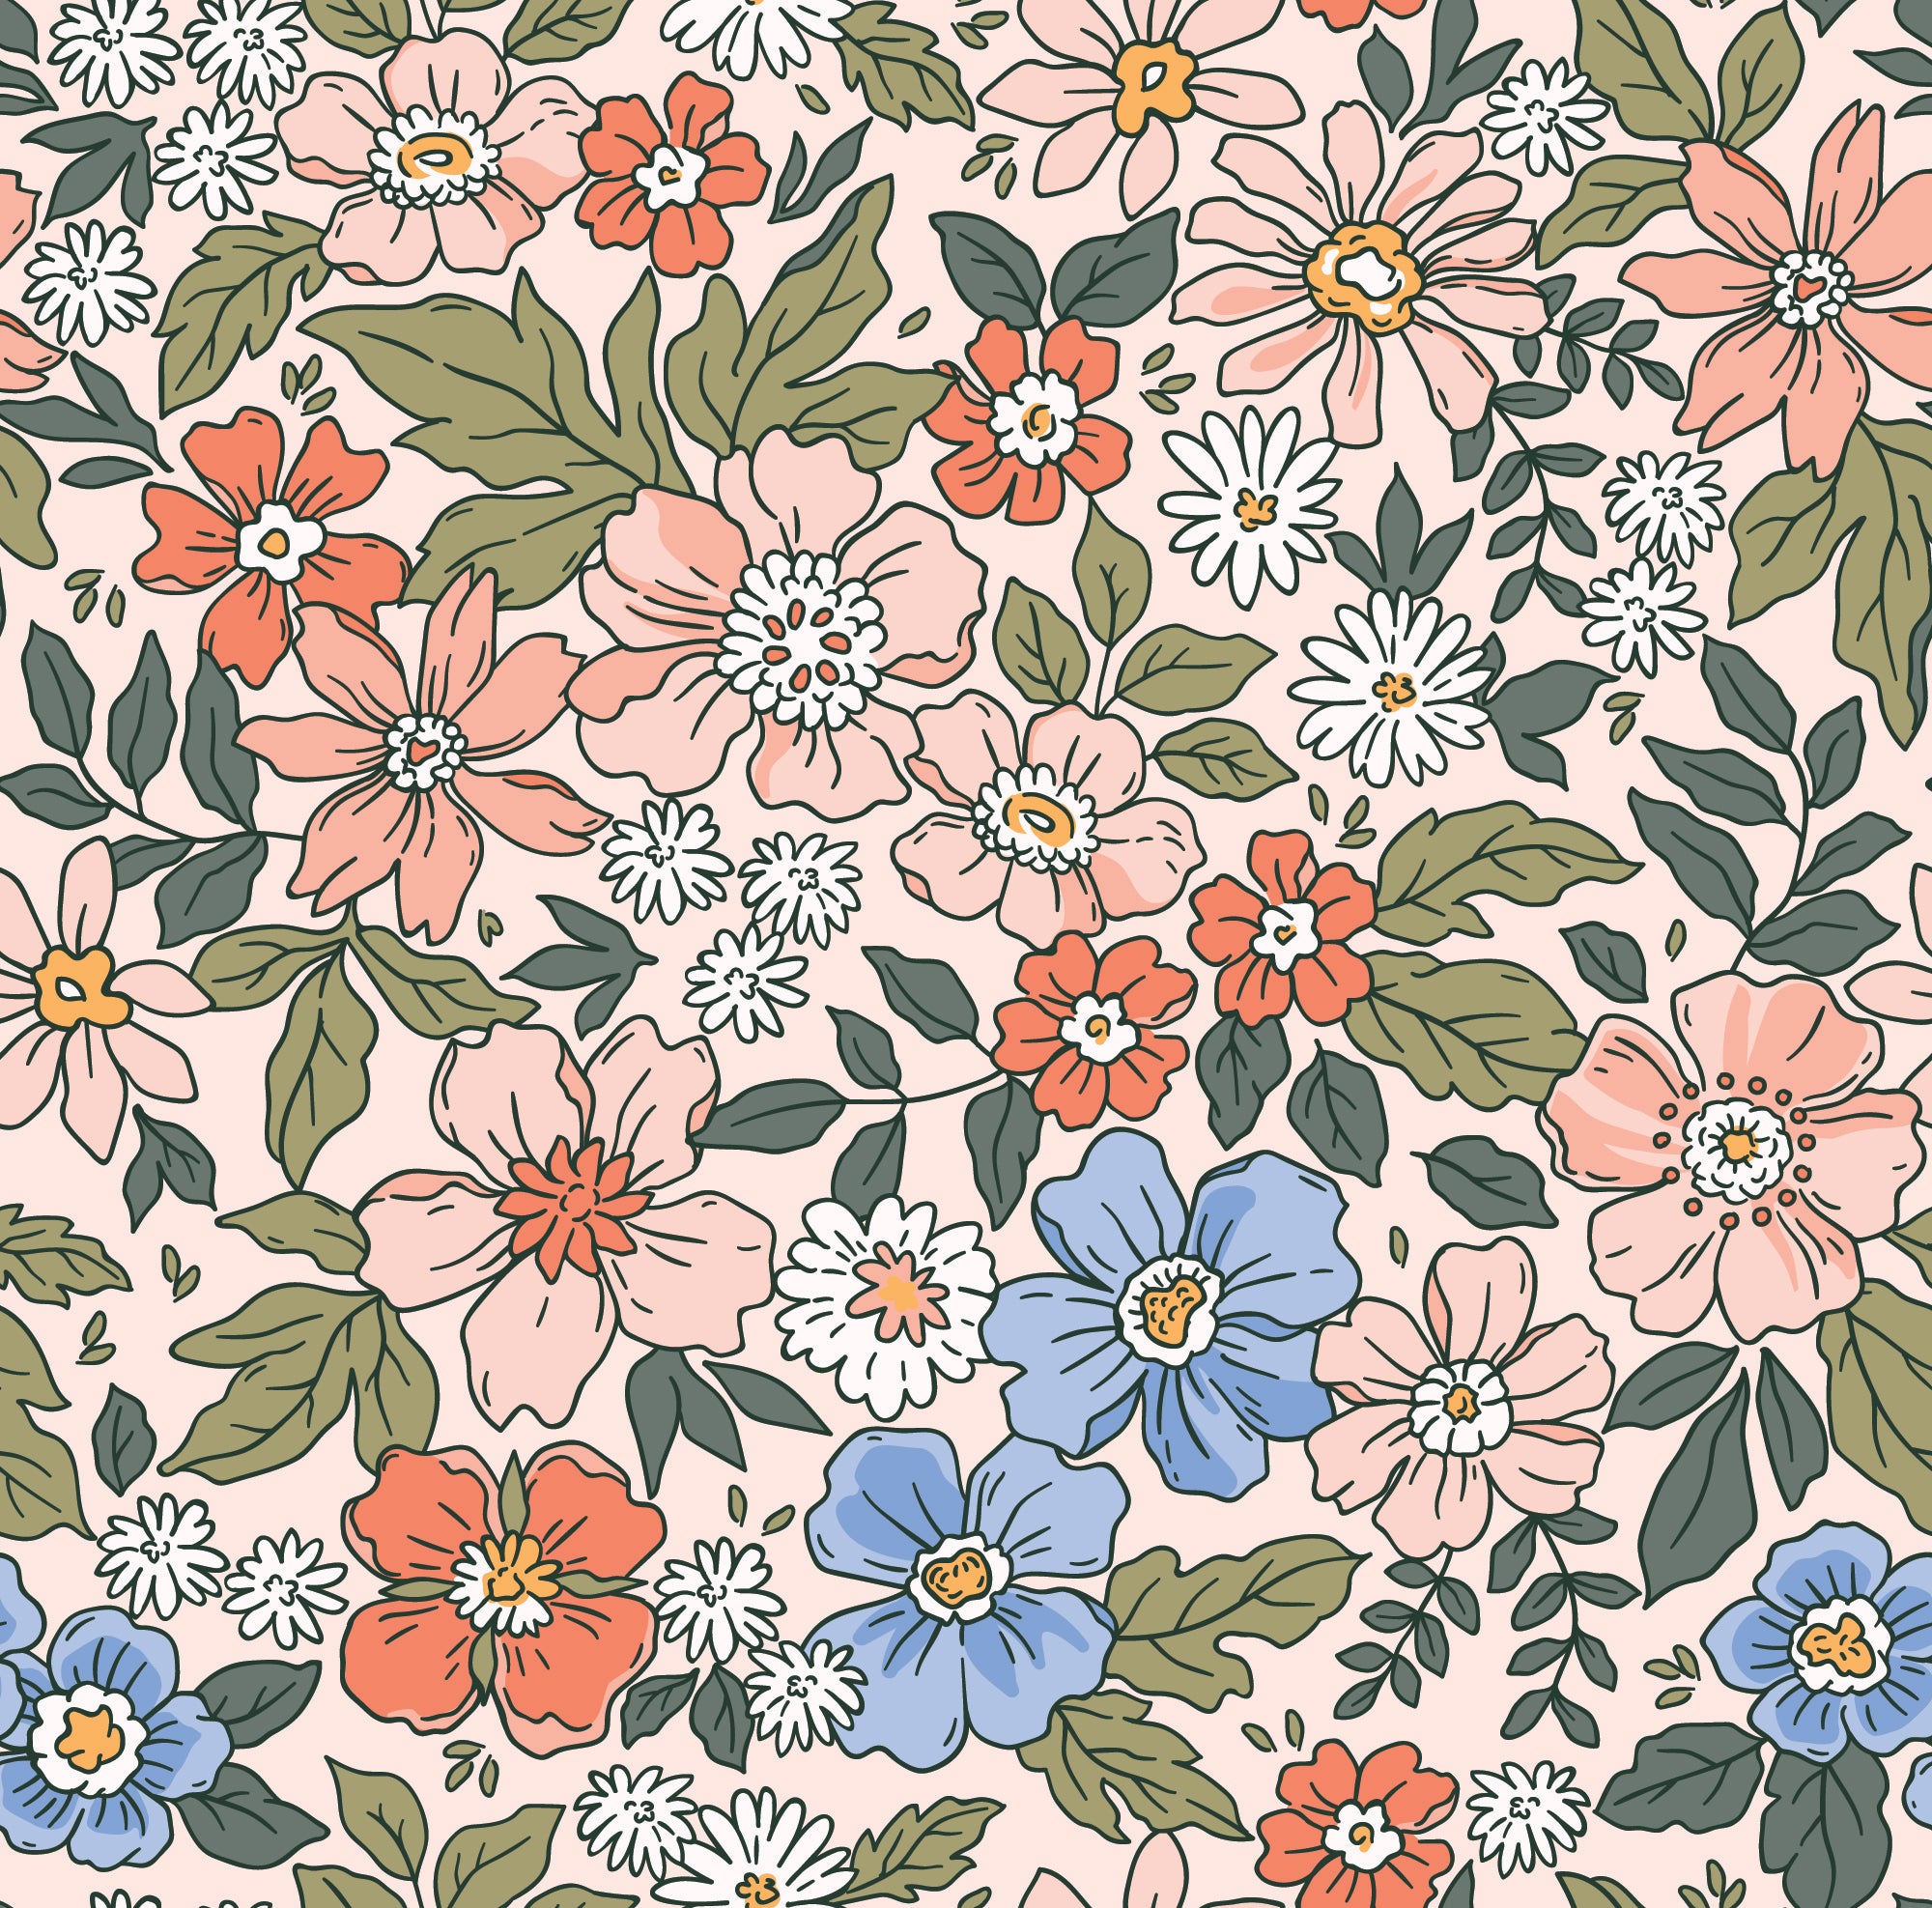 Detailed view of Watercolour Floral Wallpaper II featuring coral, blue, and white flowers in a watercolor style